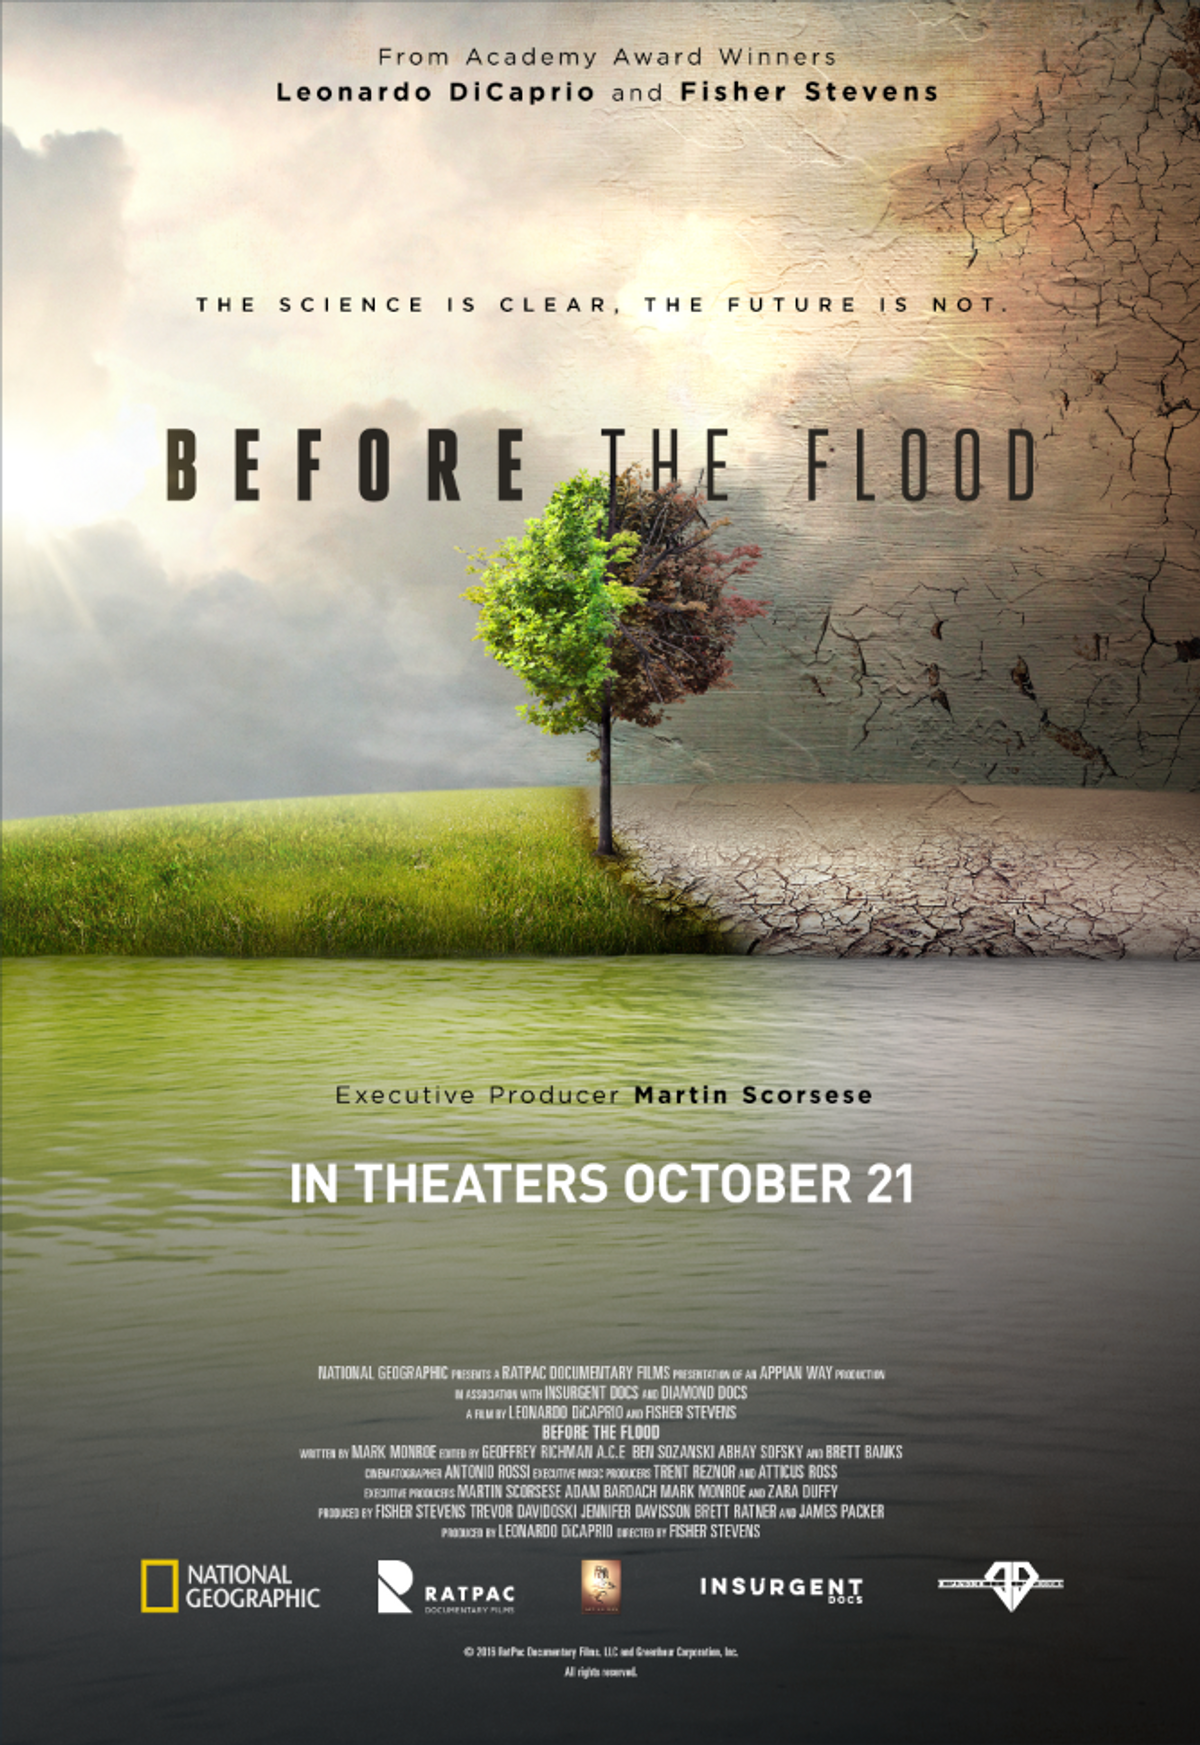 10 Things I Learned From The Must-Watch Documentary 'Before The Flood'